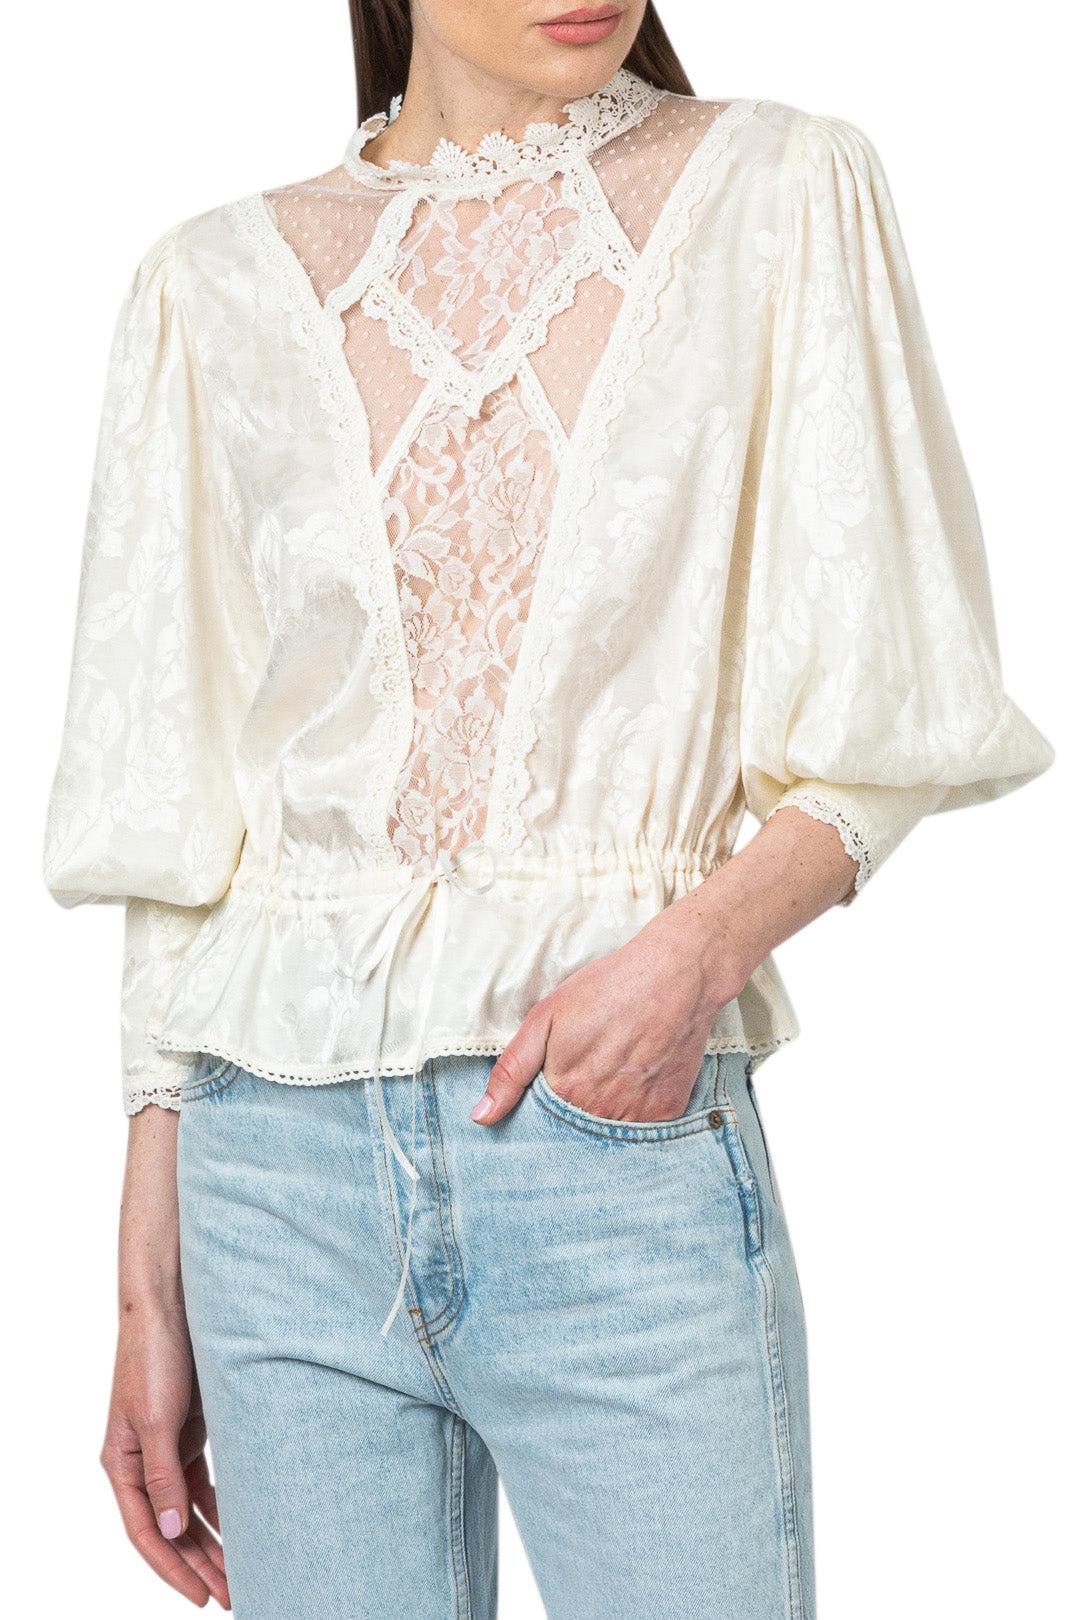 By Timo-Ruffled floral tulle blouse-2110702-dgallerystore